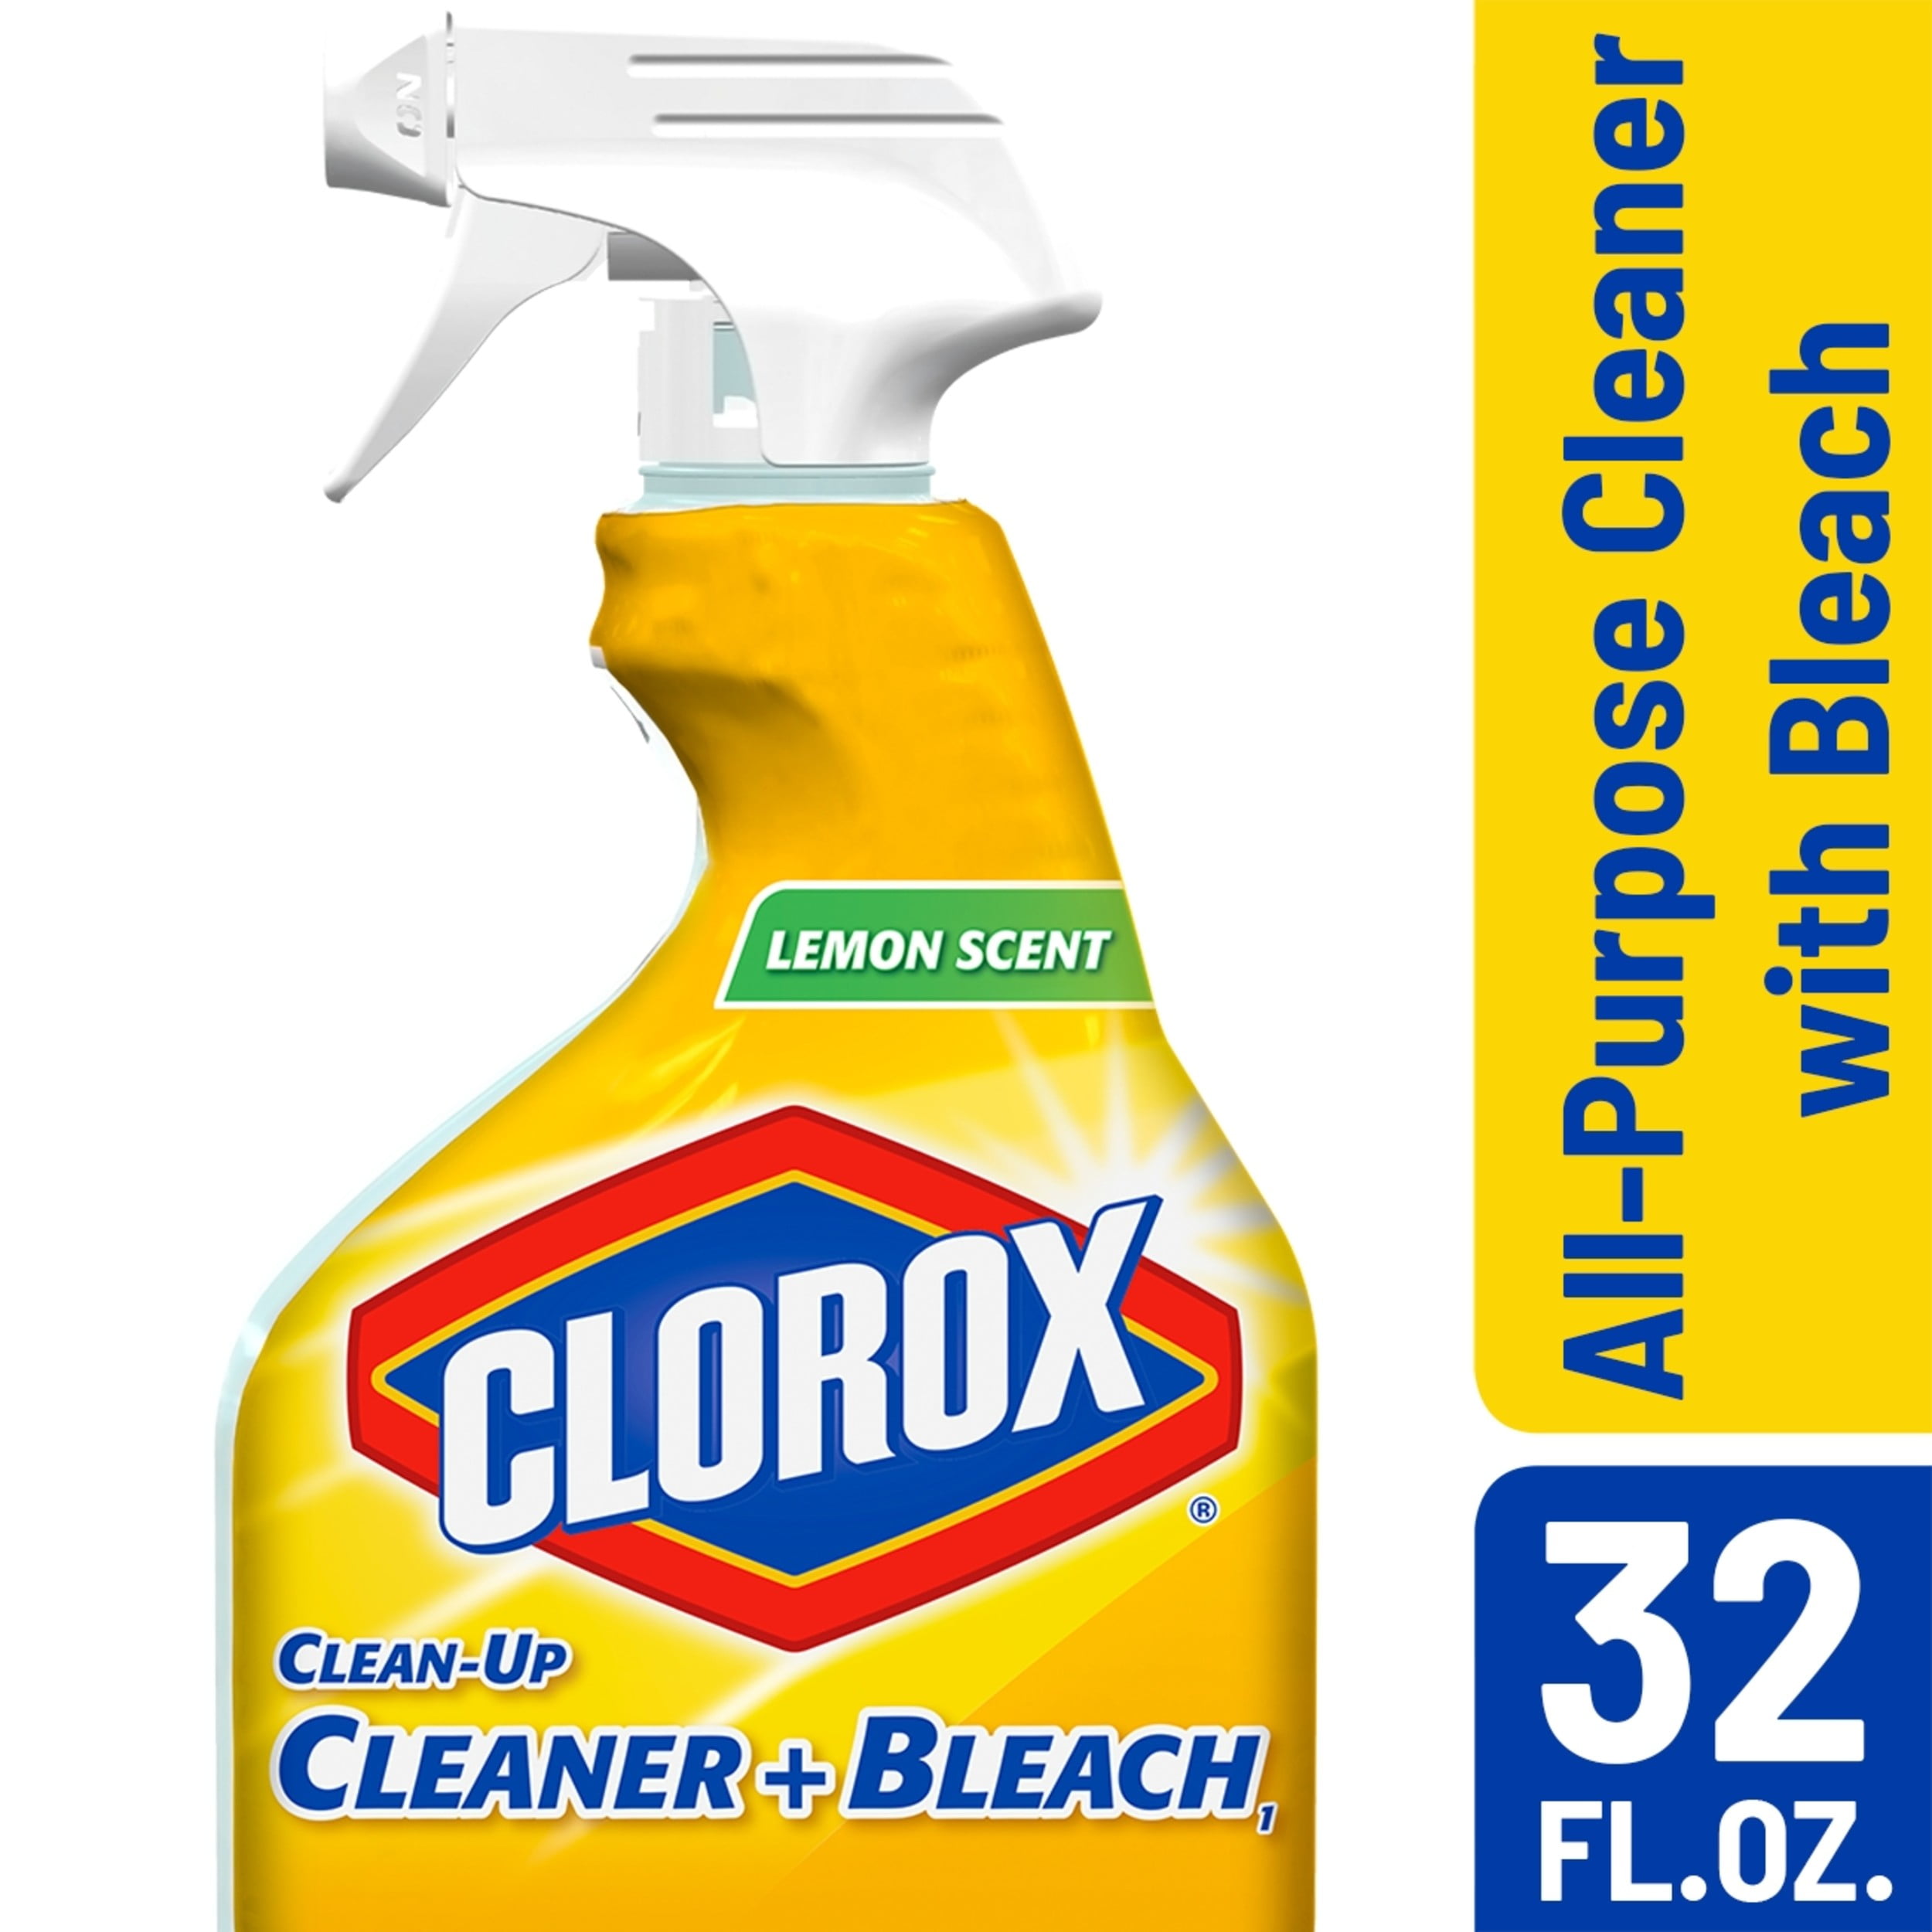 The Power Of Clorox Bleach: A Cleaner And Safer Home-8 Benefits